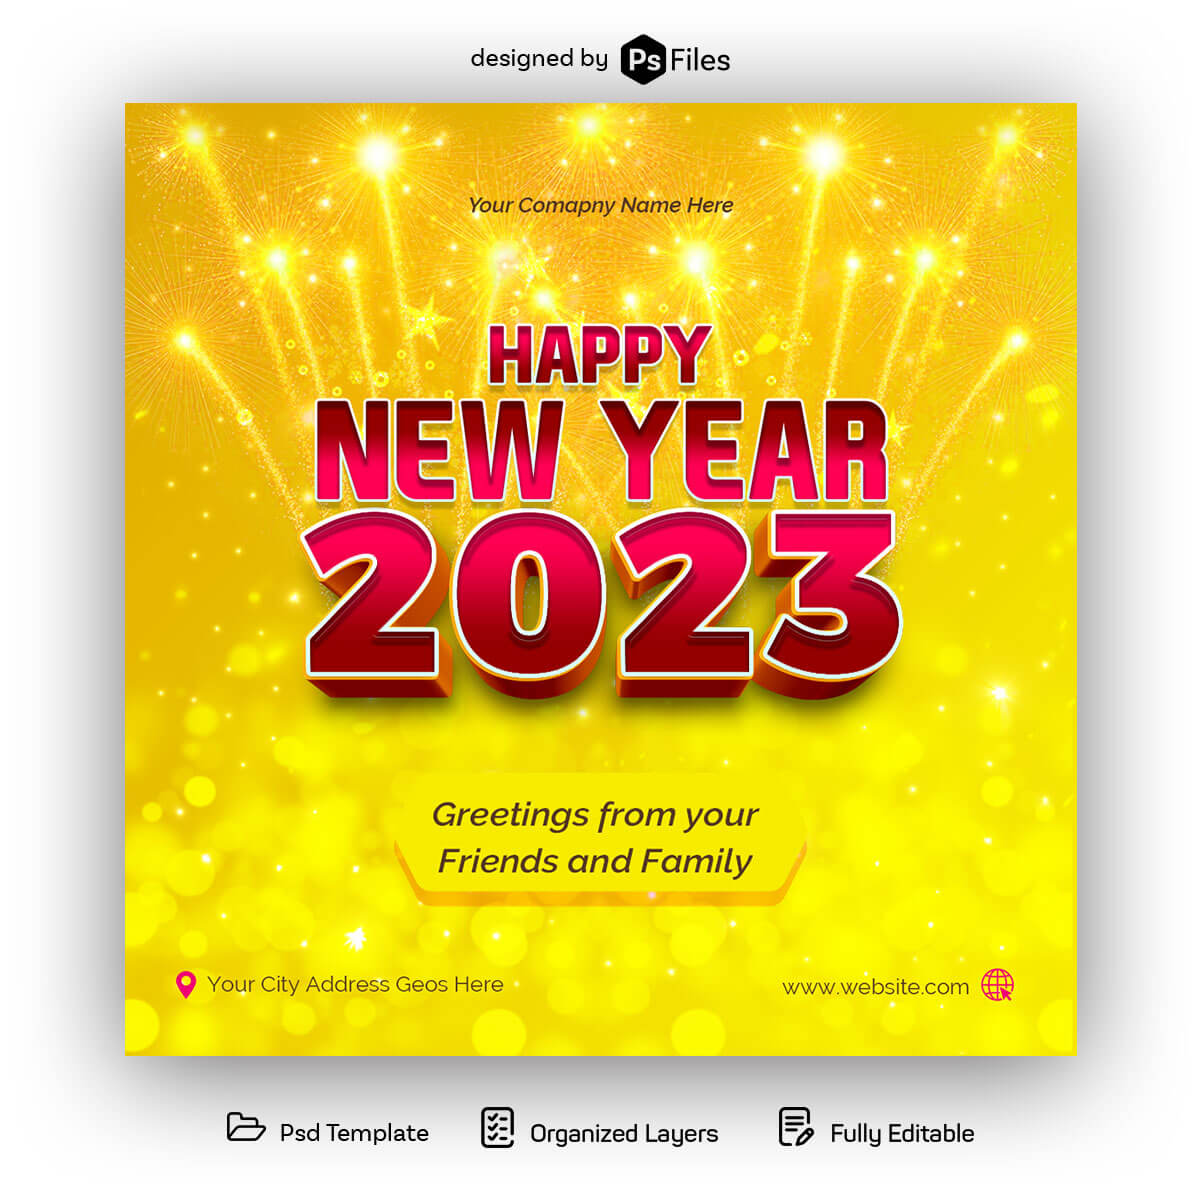 Happy New Year 2023 PSD Design Free Download